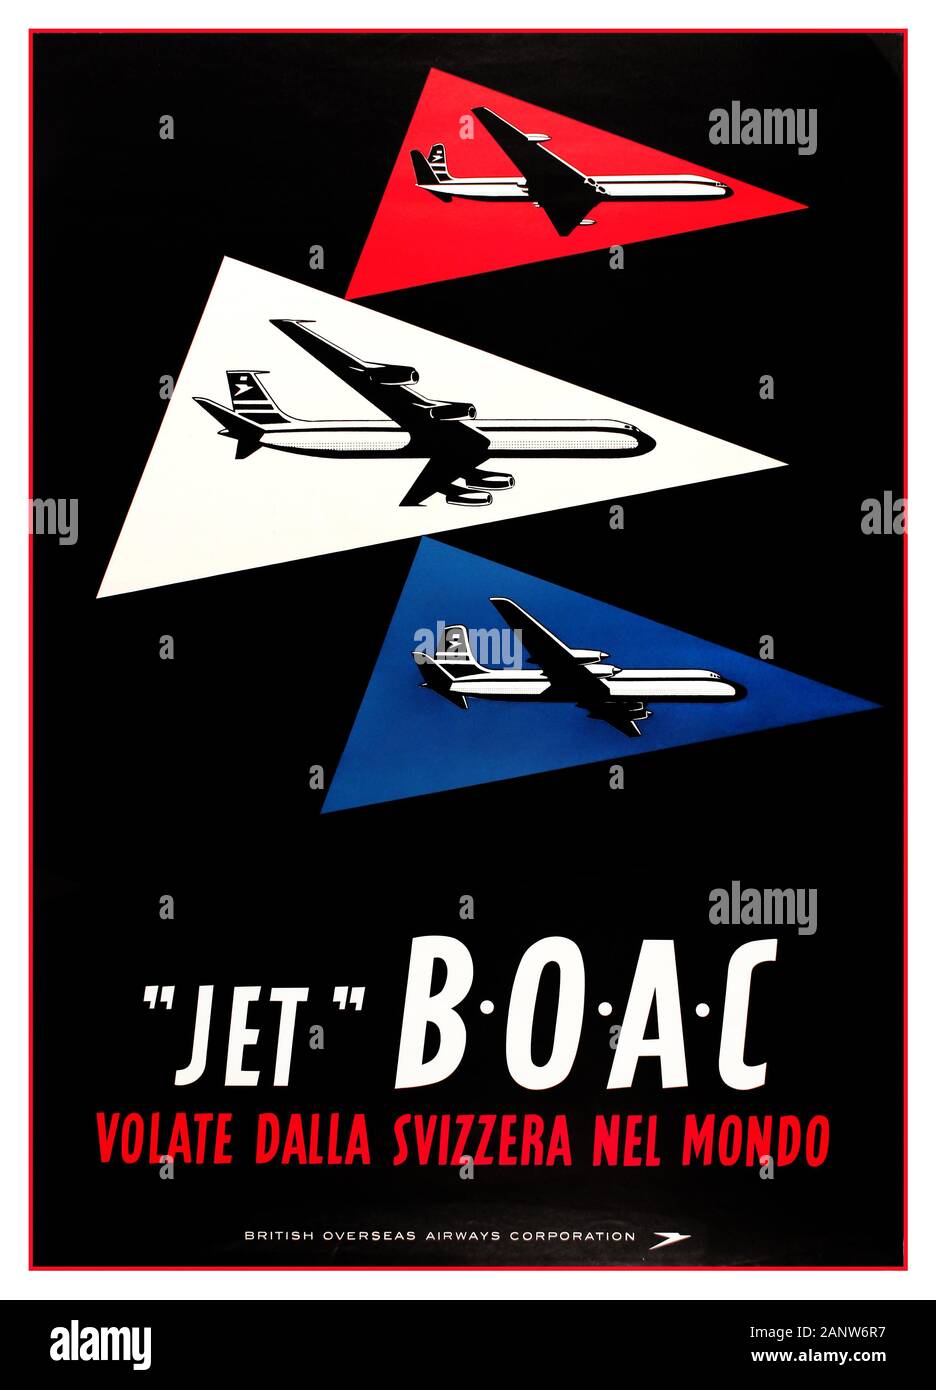 BOAC Vintage travel advertising poster 1960's published in Italian by the British Overseas Airways Corporation (B.O.A.C.) to promote its flights from Switzerland: Fly Worldwide From Switzerland / 'Jet' B.O.A.C Volate dalla Svizzera nel Mundo. Images of three BOAC planes in three different triangles coloured in red, white and blue against a black background with the title below in stylised white and red letters and the BOAC speedbird logo in white. Printed in Switzerland by Bollmann, Zurich. Country: Switzerland, year of printing: 1960, designer: J Wild, Stock Photo